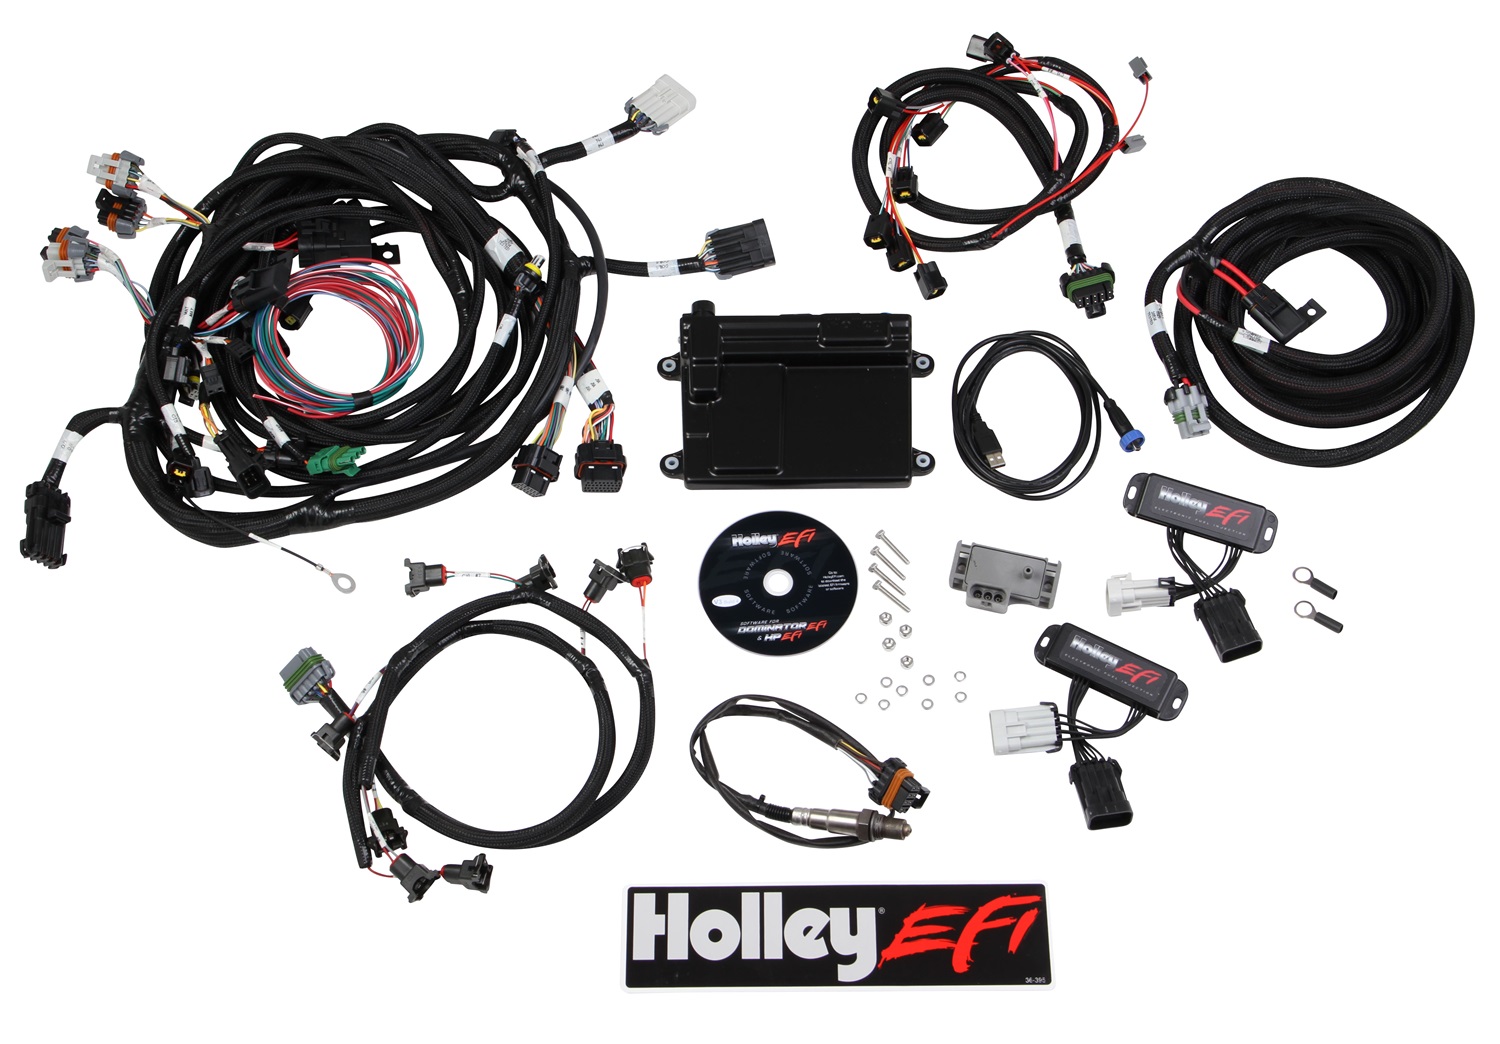 Holley Performance Holley Performance 550-617 Ford V8 Injector Harness